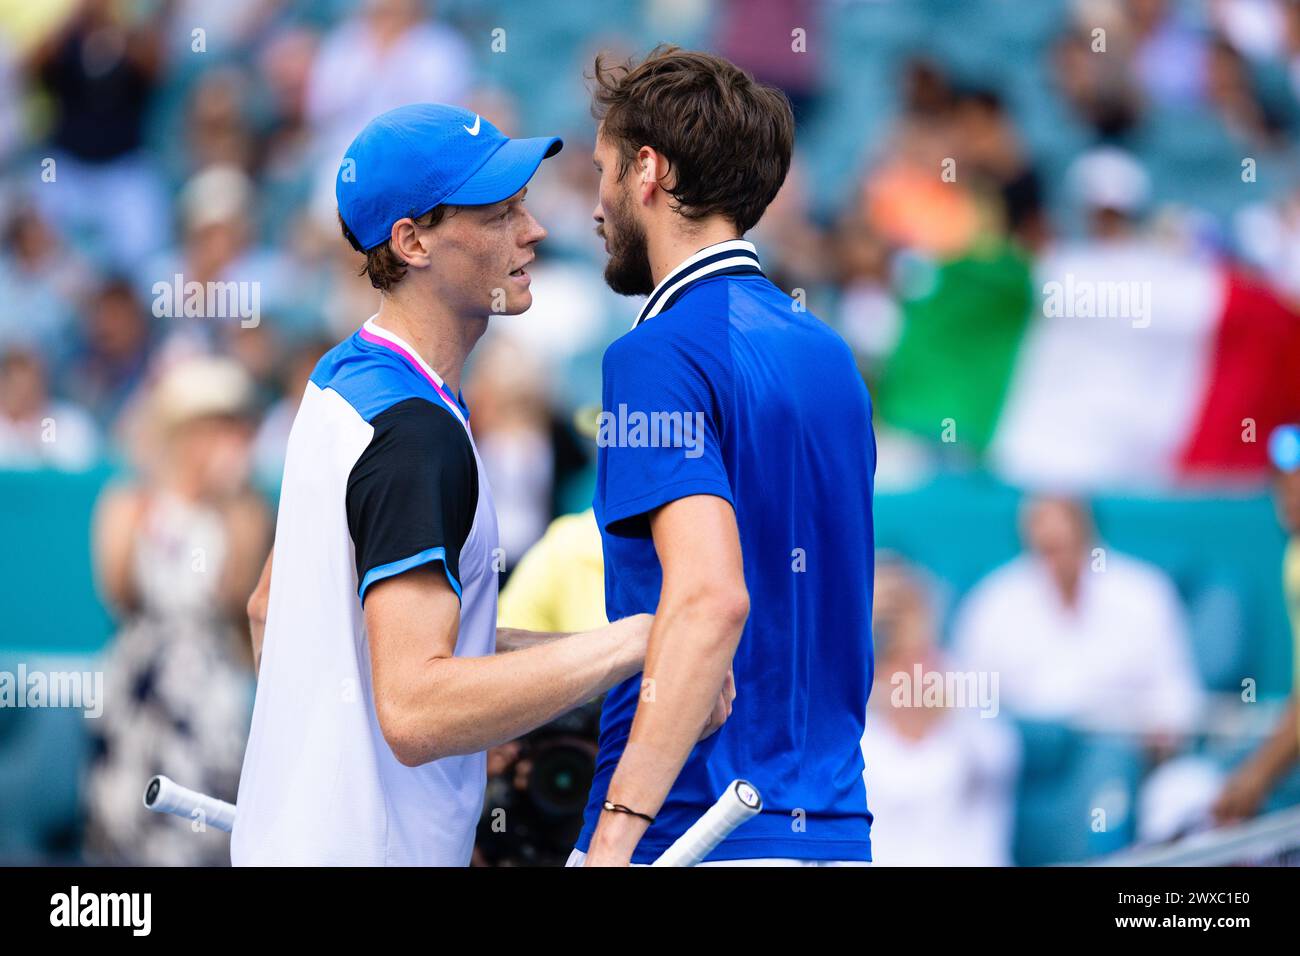 MIAMI GARDENS, FLORIDA - MARCH 29: Jannik Sinner of Italy meets Daniil Medvedev at the net after defeating him during their match on Day 14 of the Miami Open at Hard Rock Stadium on March 29, 2024 in Miami Gardens, Florida. (Photo by Mauricio Paiz) Stock Photo